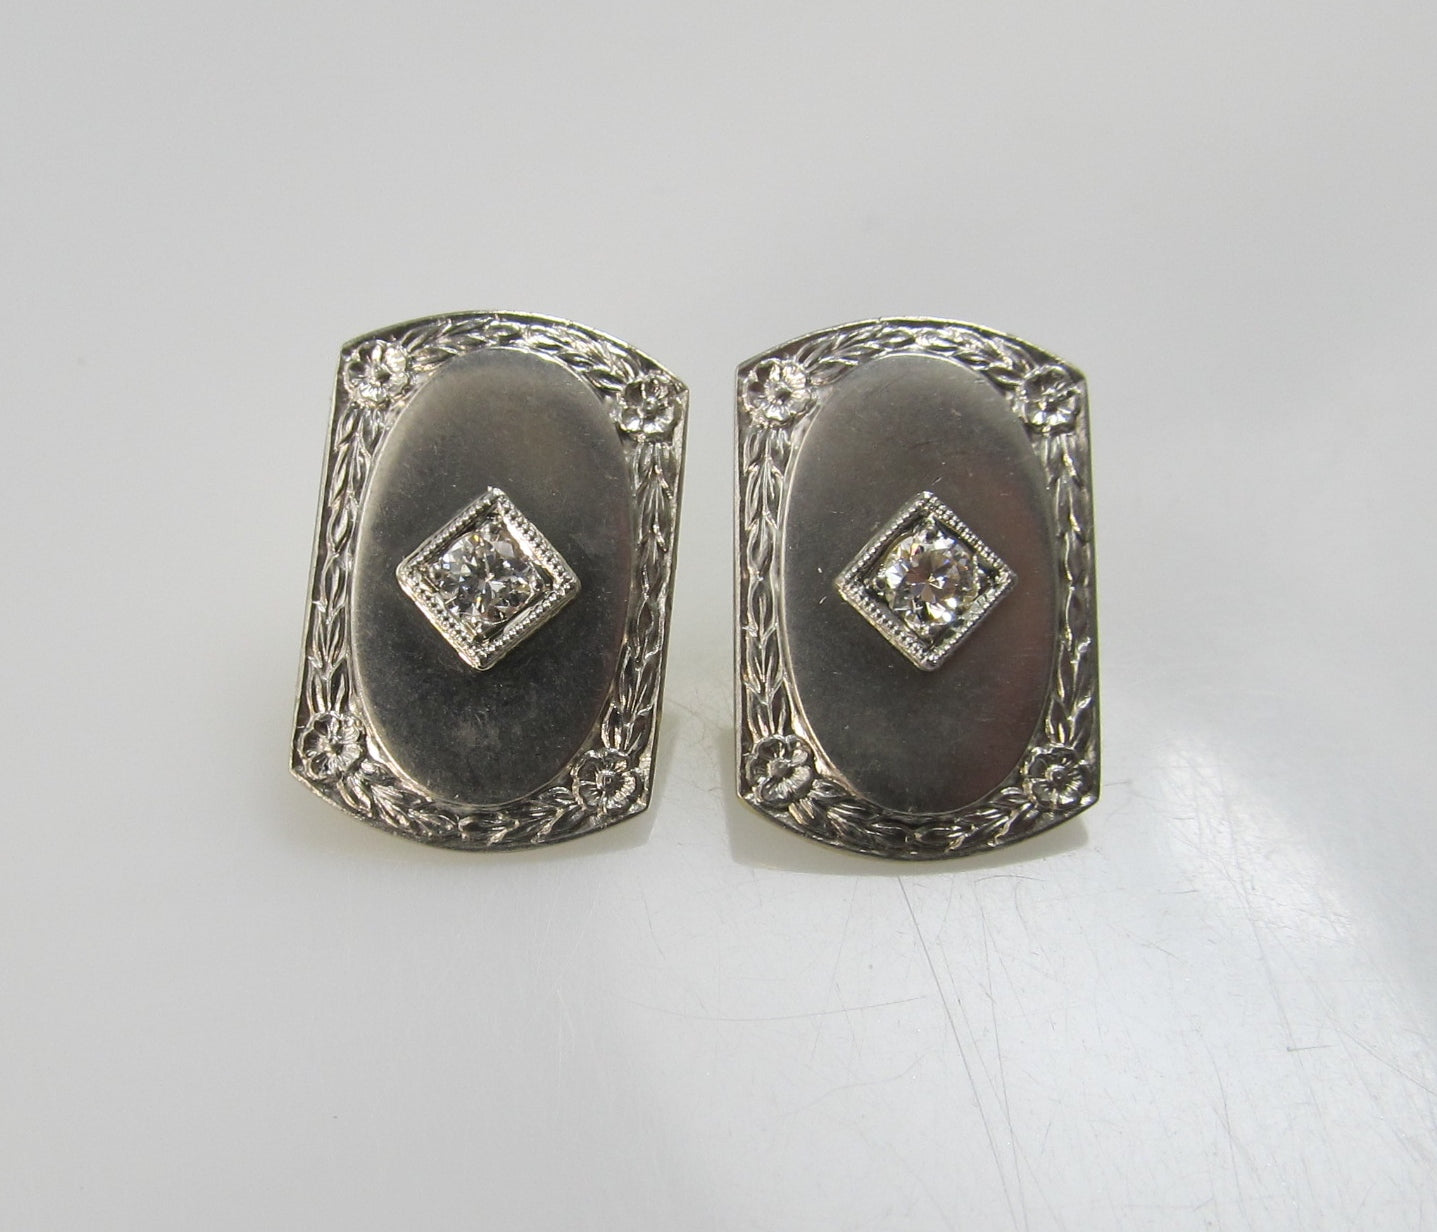 14k and platinum earrings with .20cts in diamonds, circa 1920.